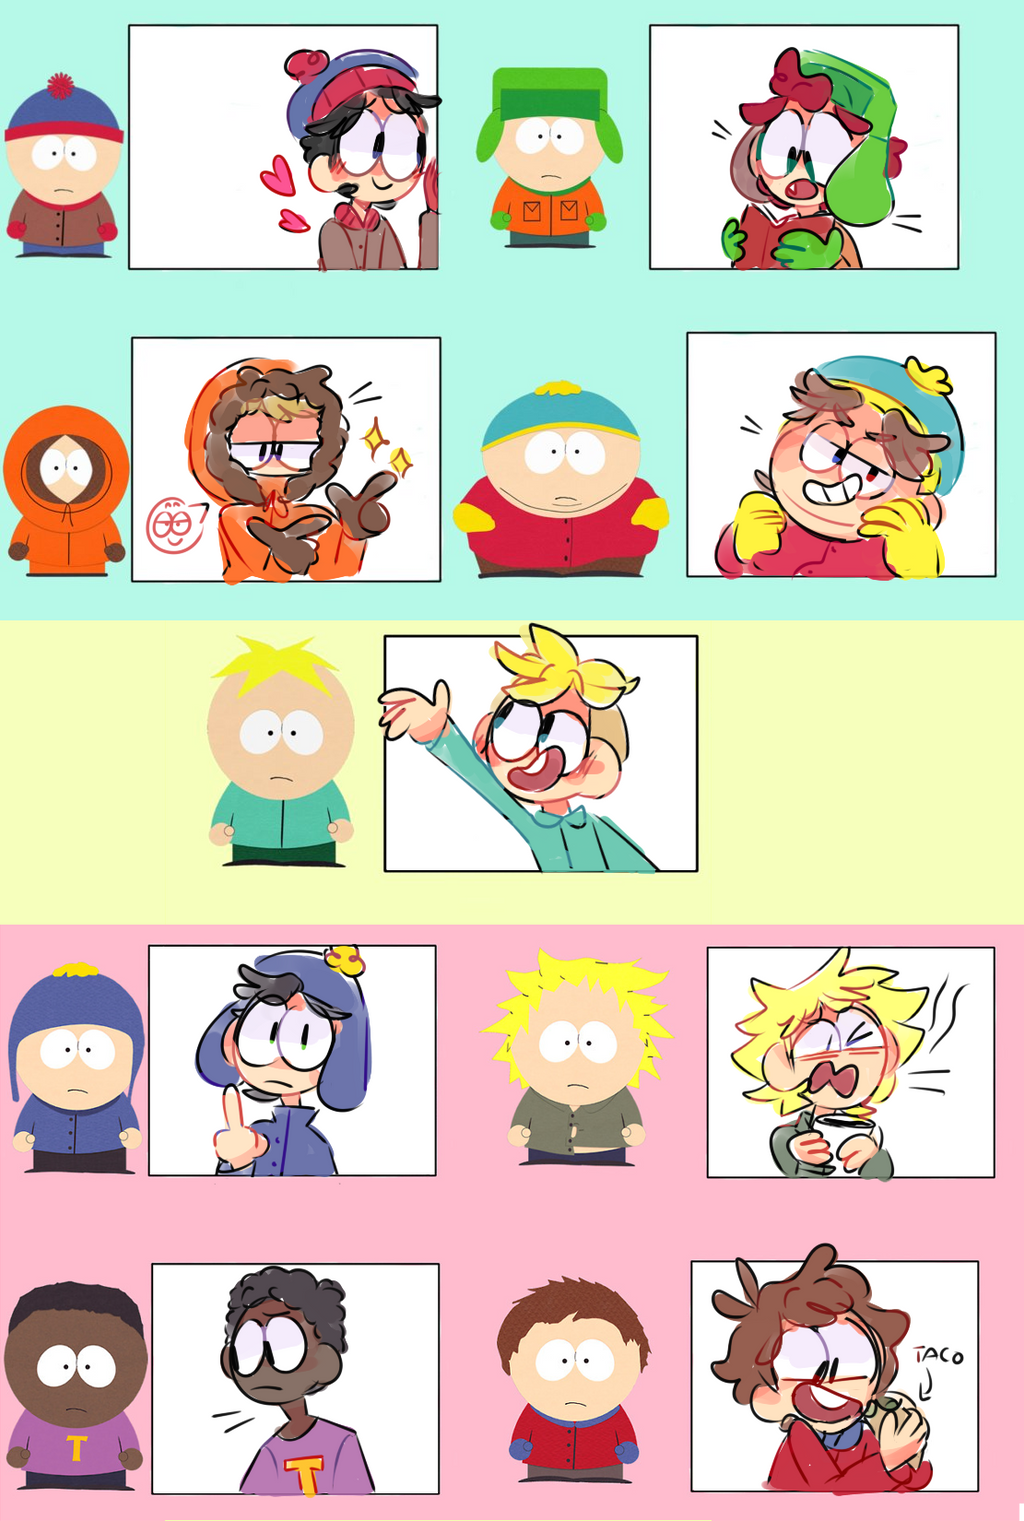 Indestructobob in South Park style by Gaelsolis13 on DeviantArt